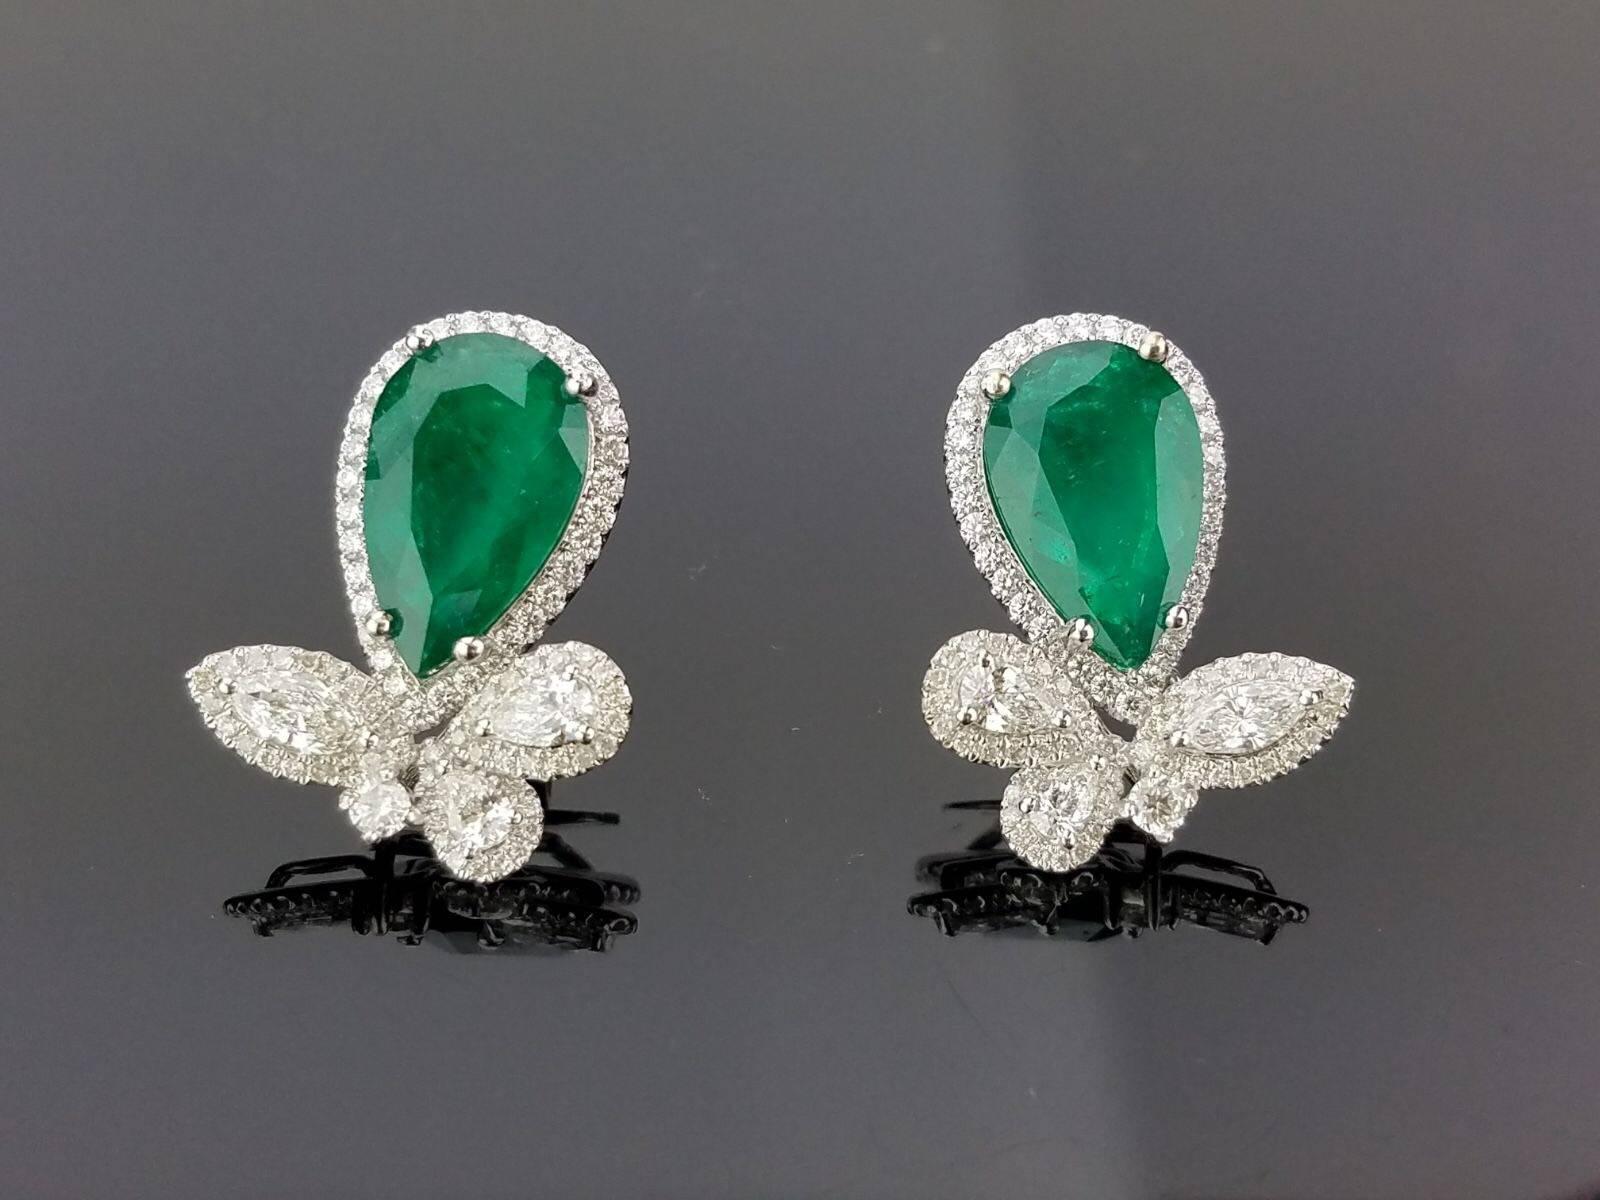 A classic pair of earrings manufactured in Hong Kong, with 4 lustrous pear-shaped Colombian Emeralds surrounded by diamonds and a simple floral looking white diamond mid-section, making it a unique design. The earring has a push and pull backing,